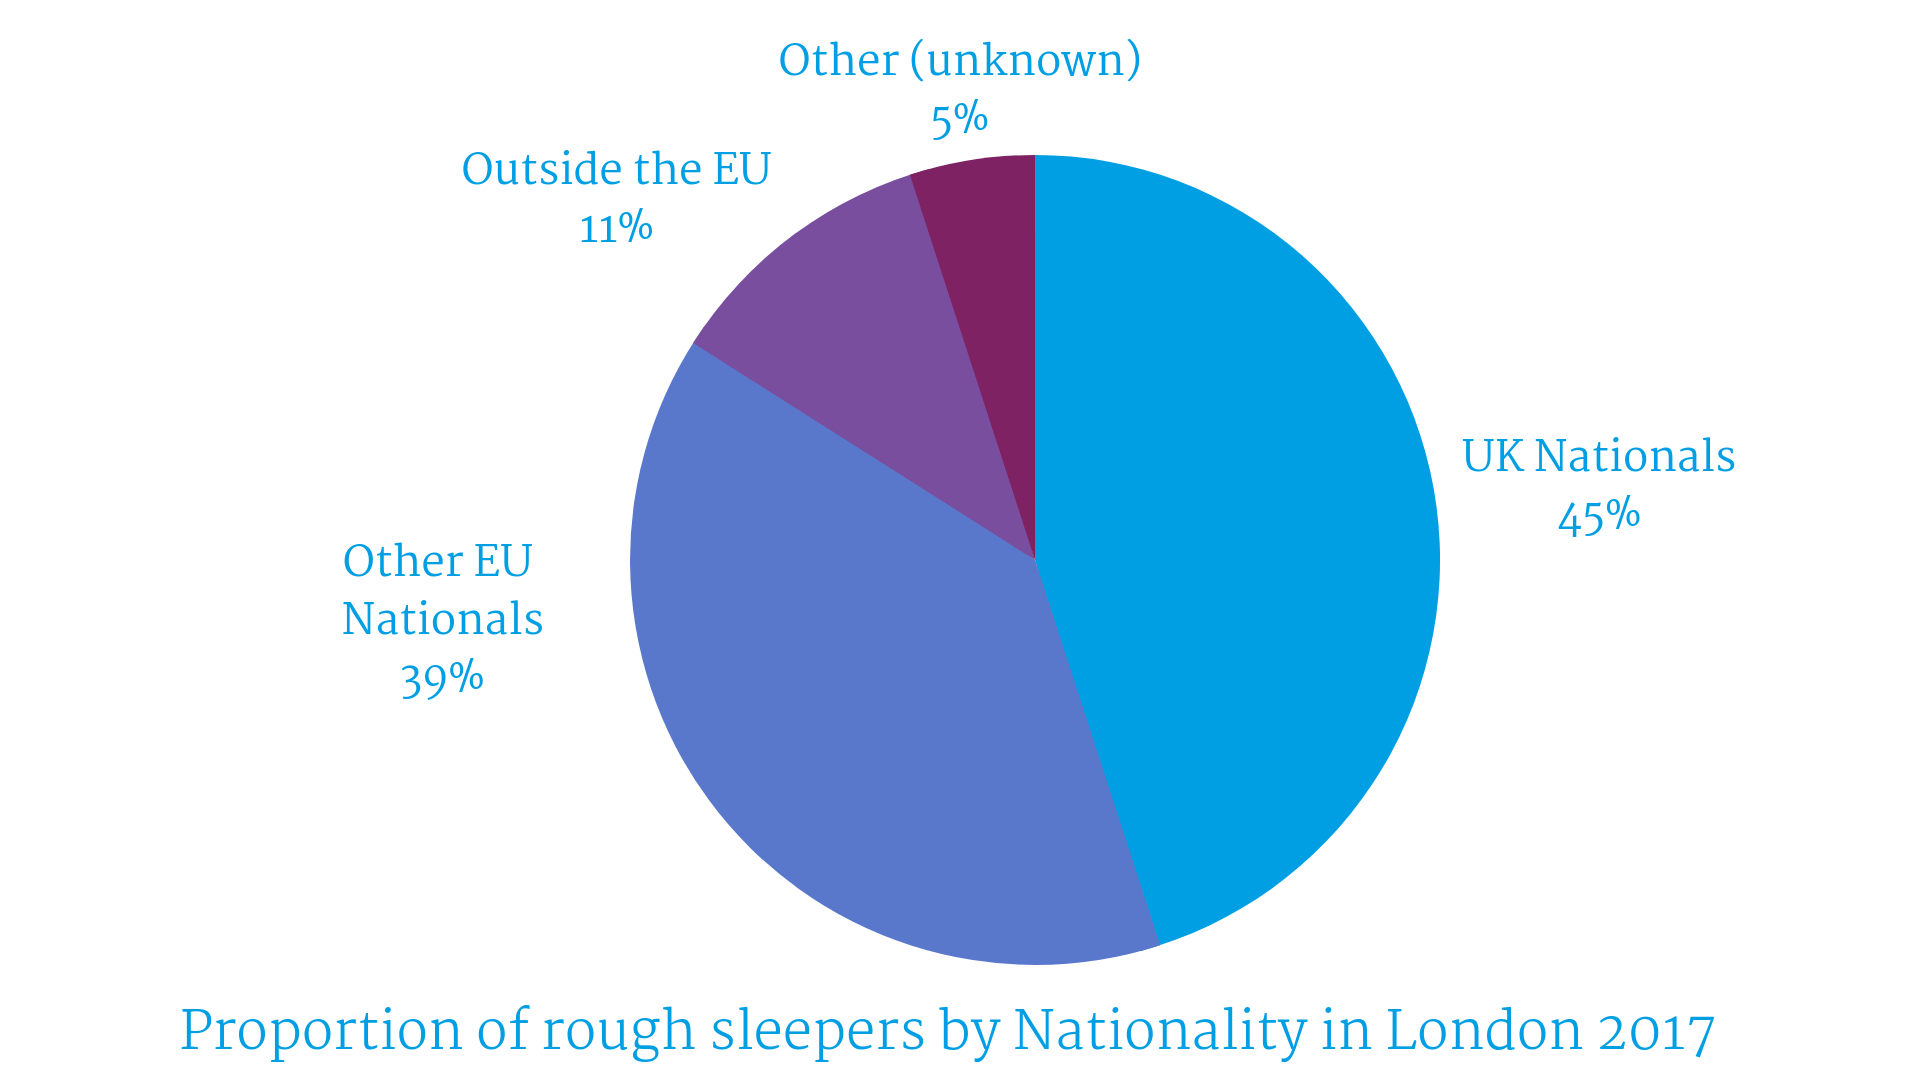 Proportion of rough sleepers by Nationality in London